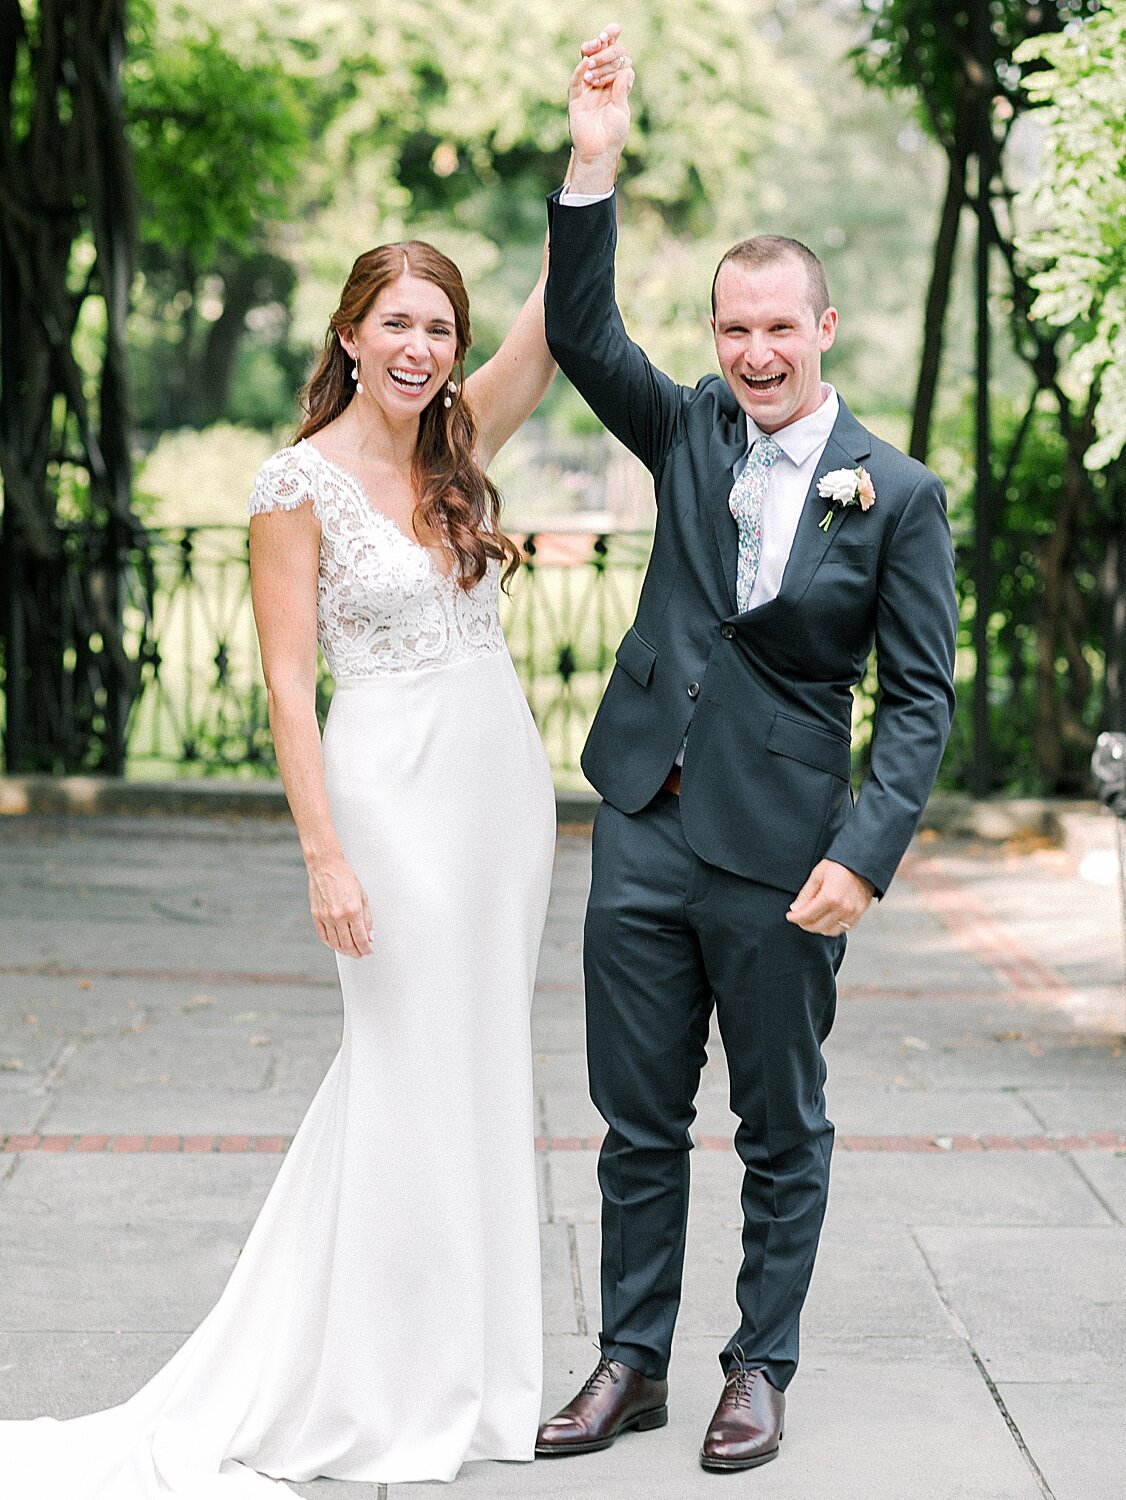 newlyweds cheer after signing marriage licnese | Asher Gardner Photography | Elopement at the Central Park Conservatory Gardens